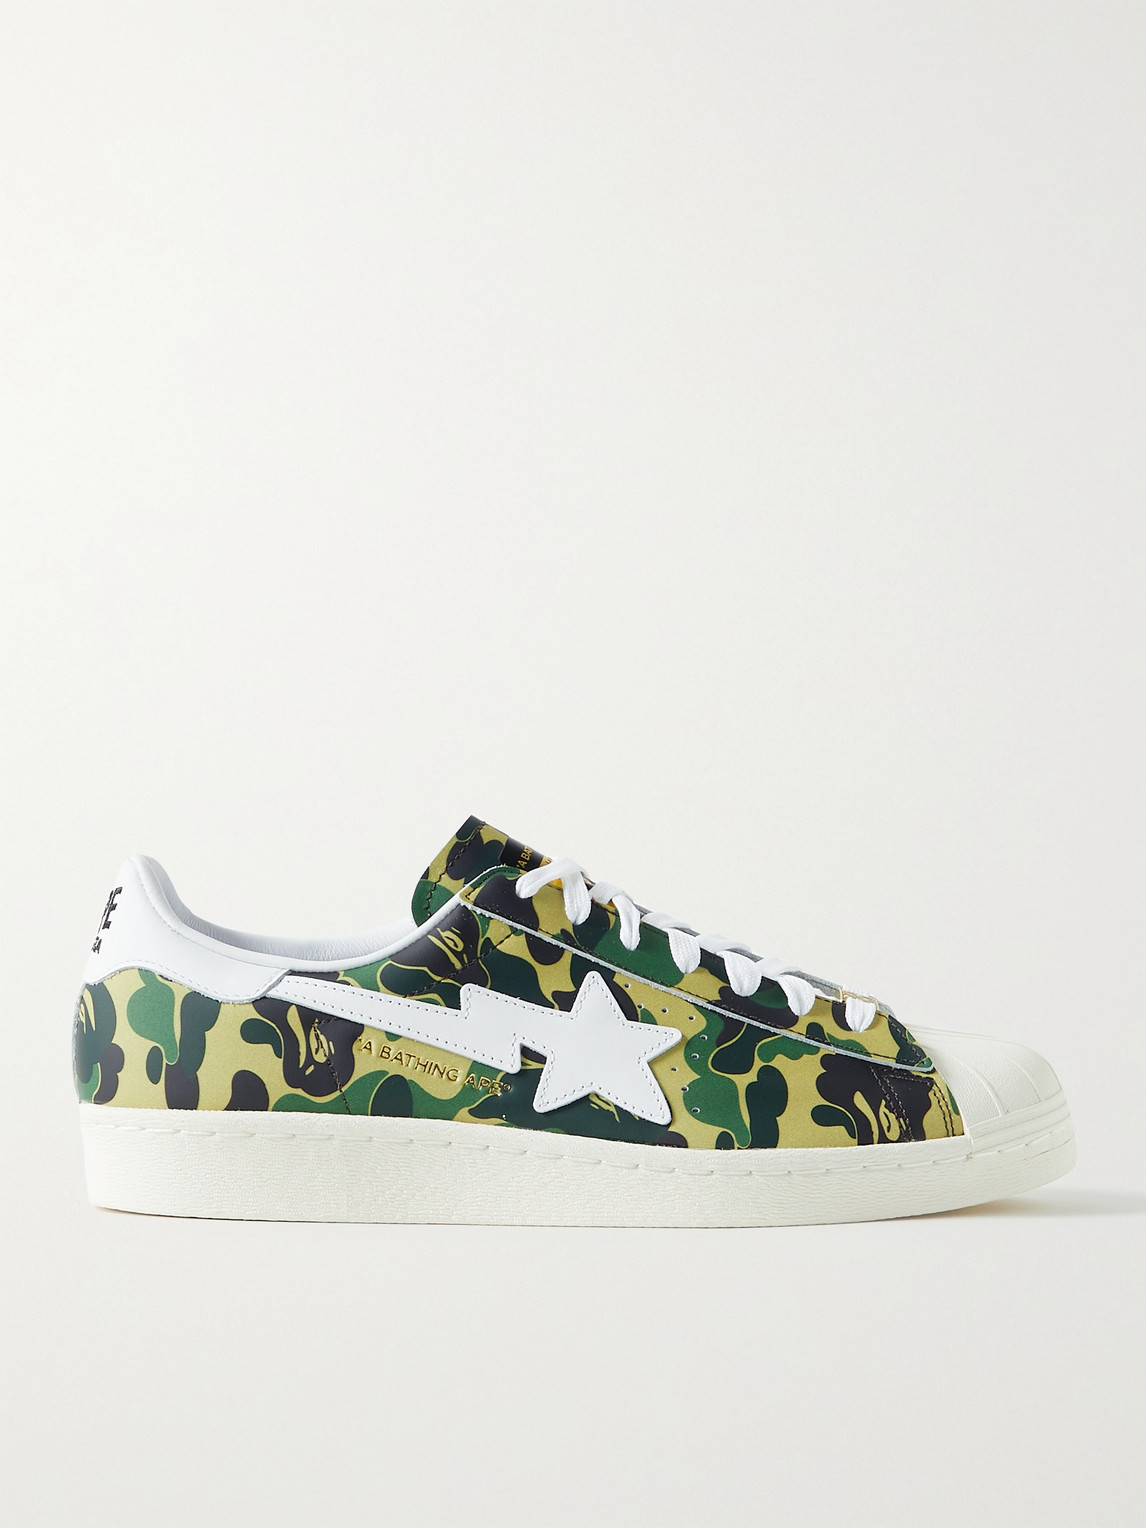 Adidas Consortium Bape Superstar 80s Camouflage-print Leather Sneakers In Green